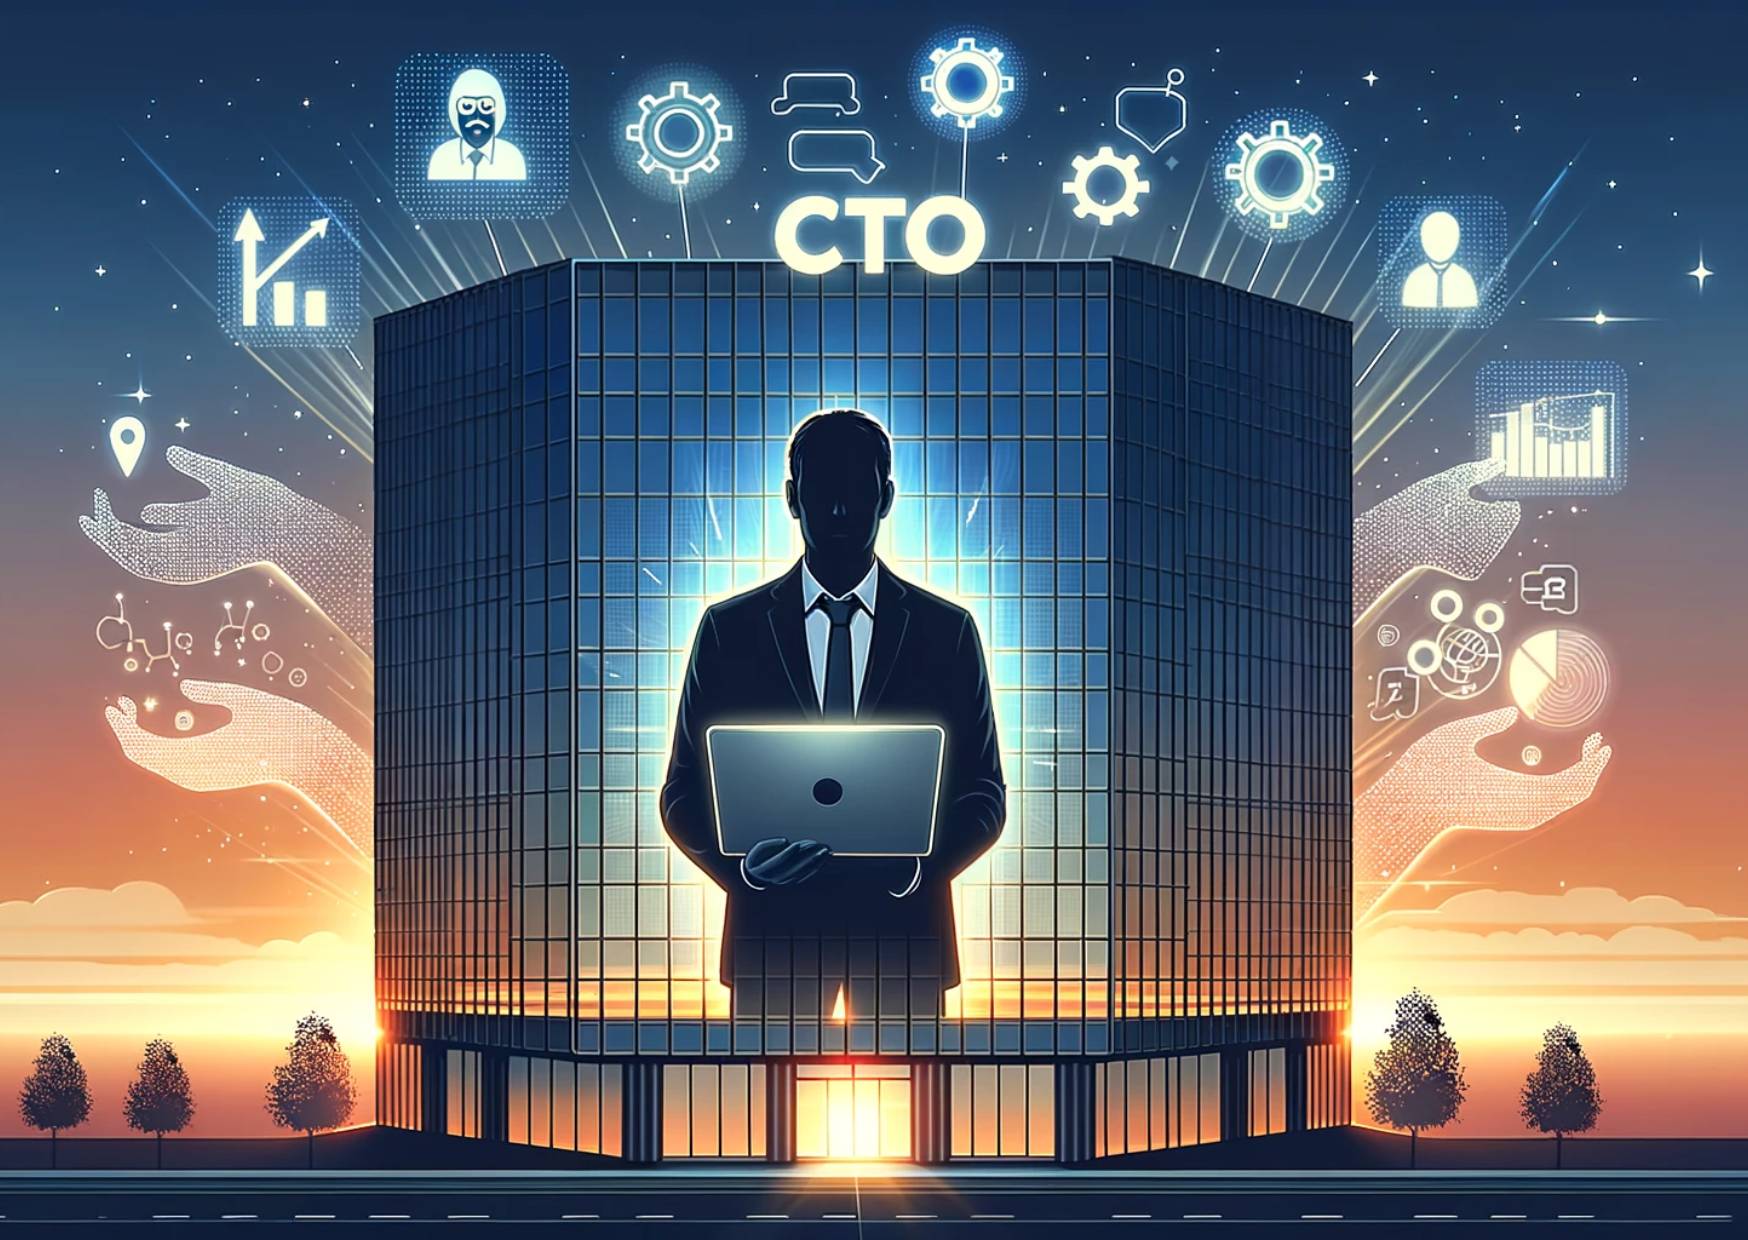 Illustration-of-a-CTO-Silhouette-on-a-corporate-building